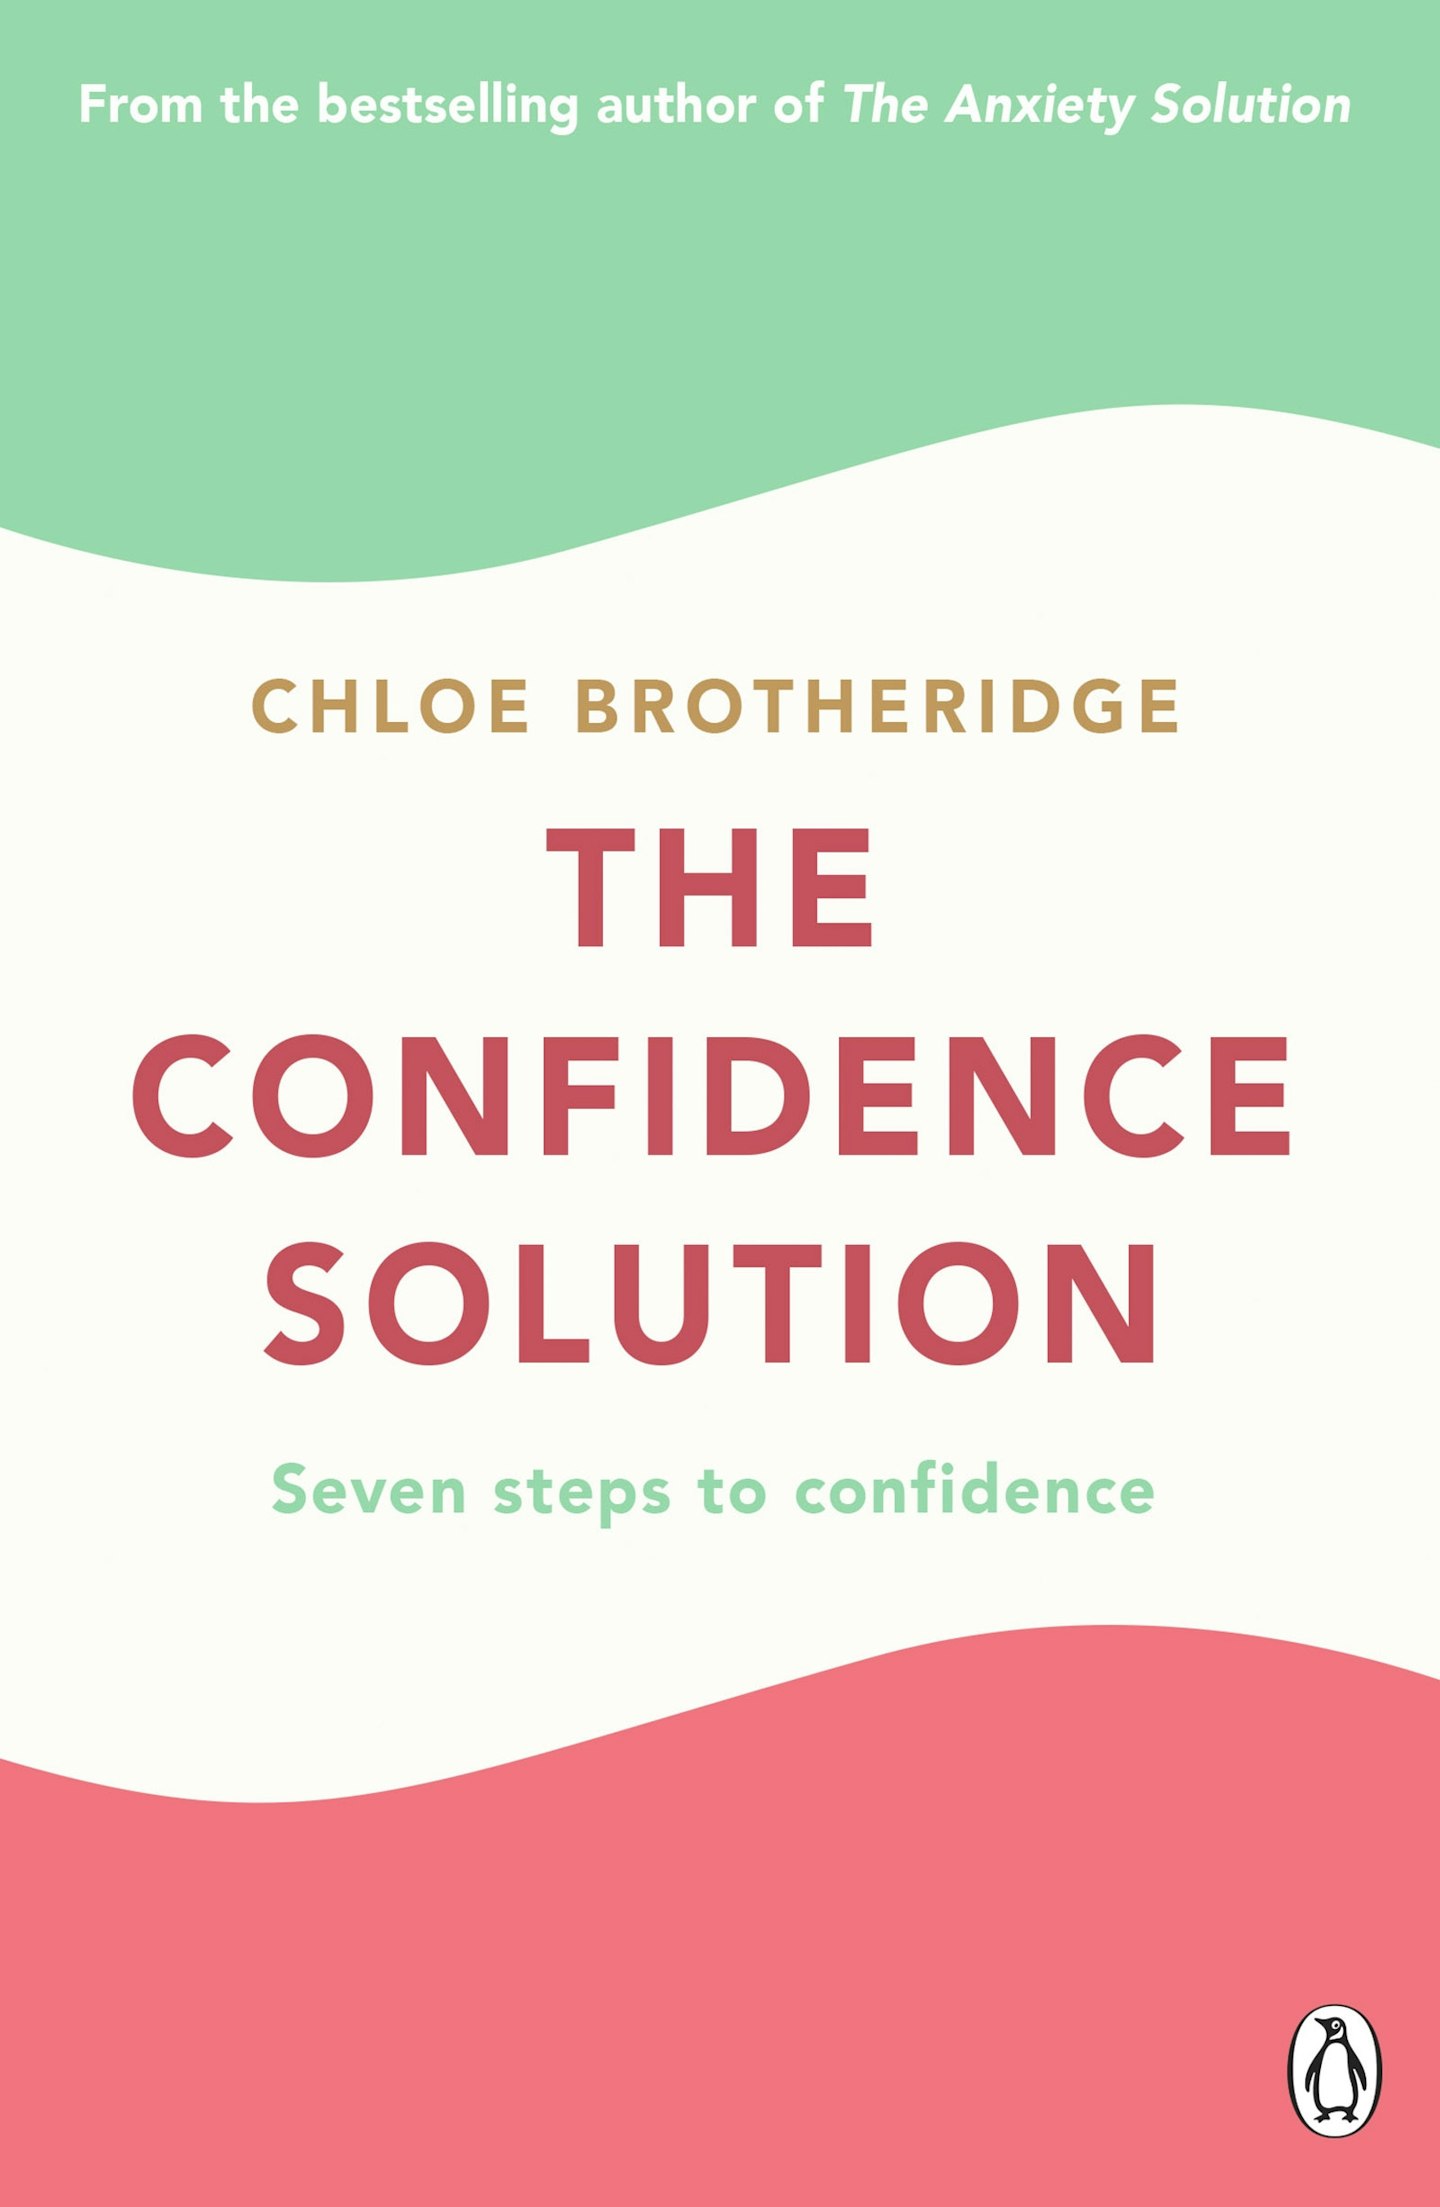 best self help books The Confidence Solution: Seven Steps to Confidence, by Chloe Brotheridge